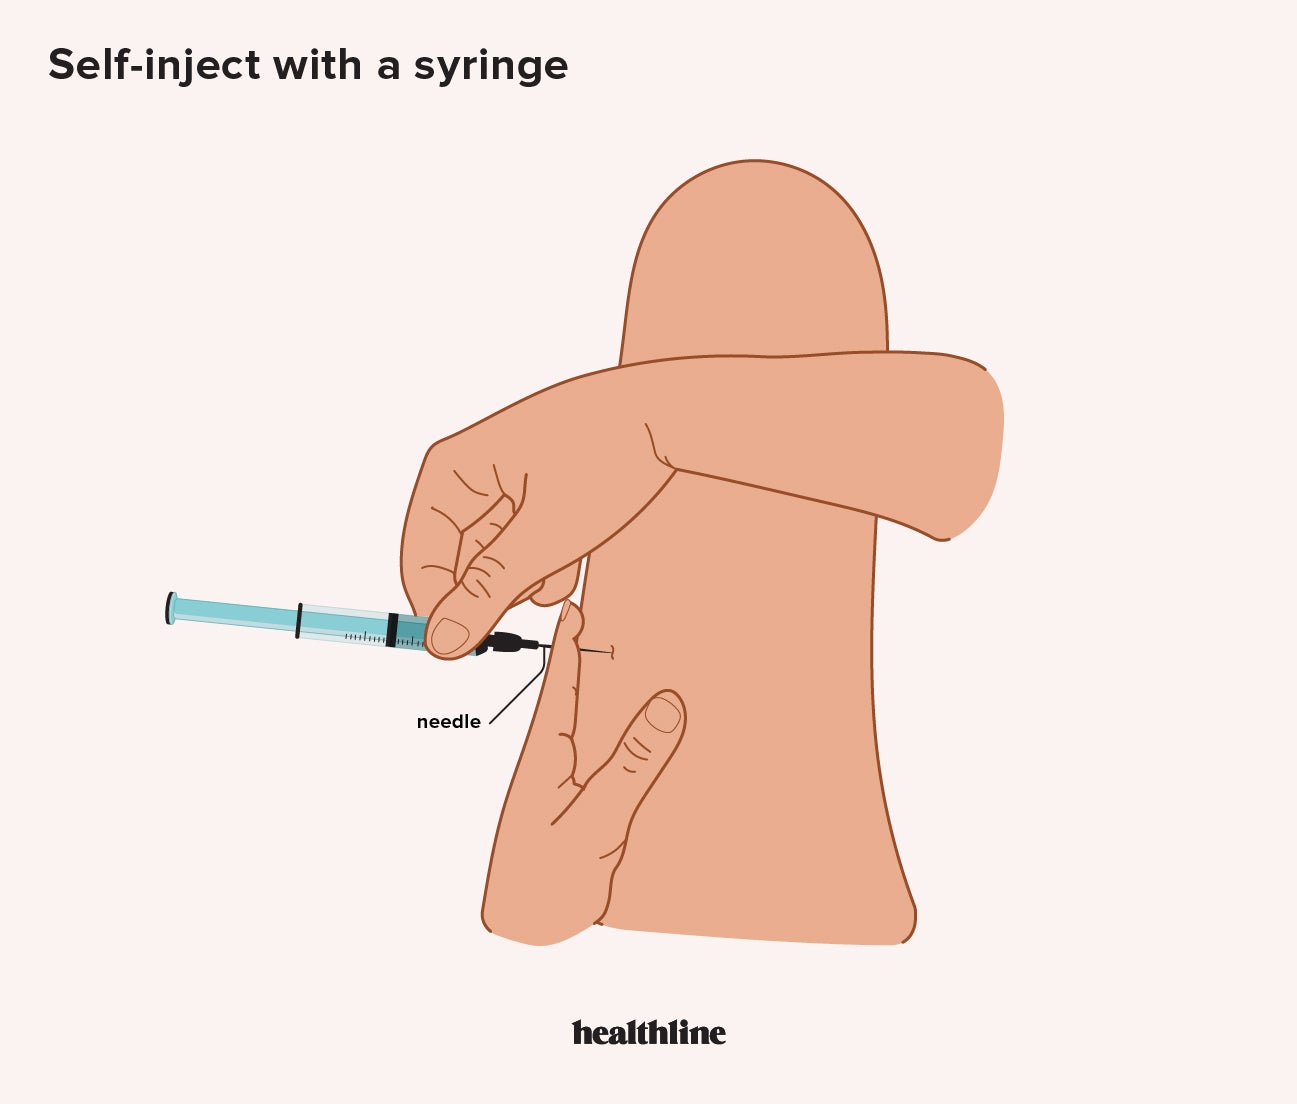 intravenous injection angle